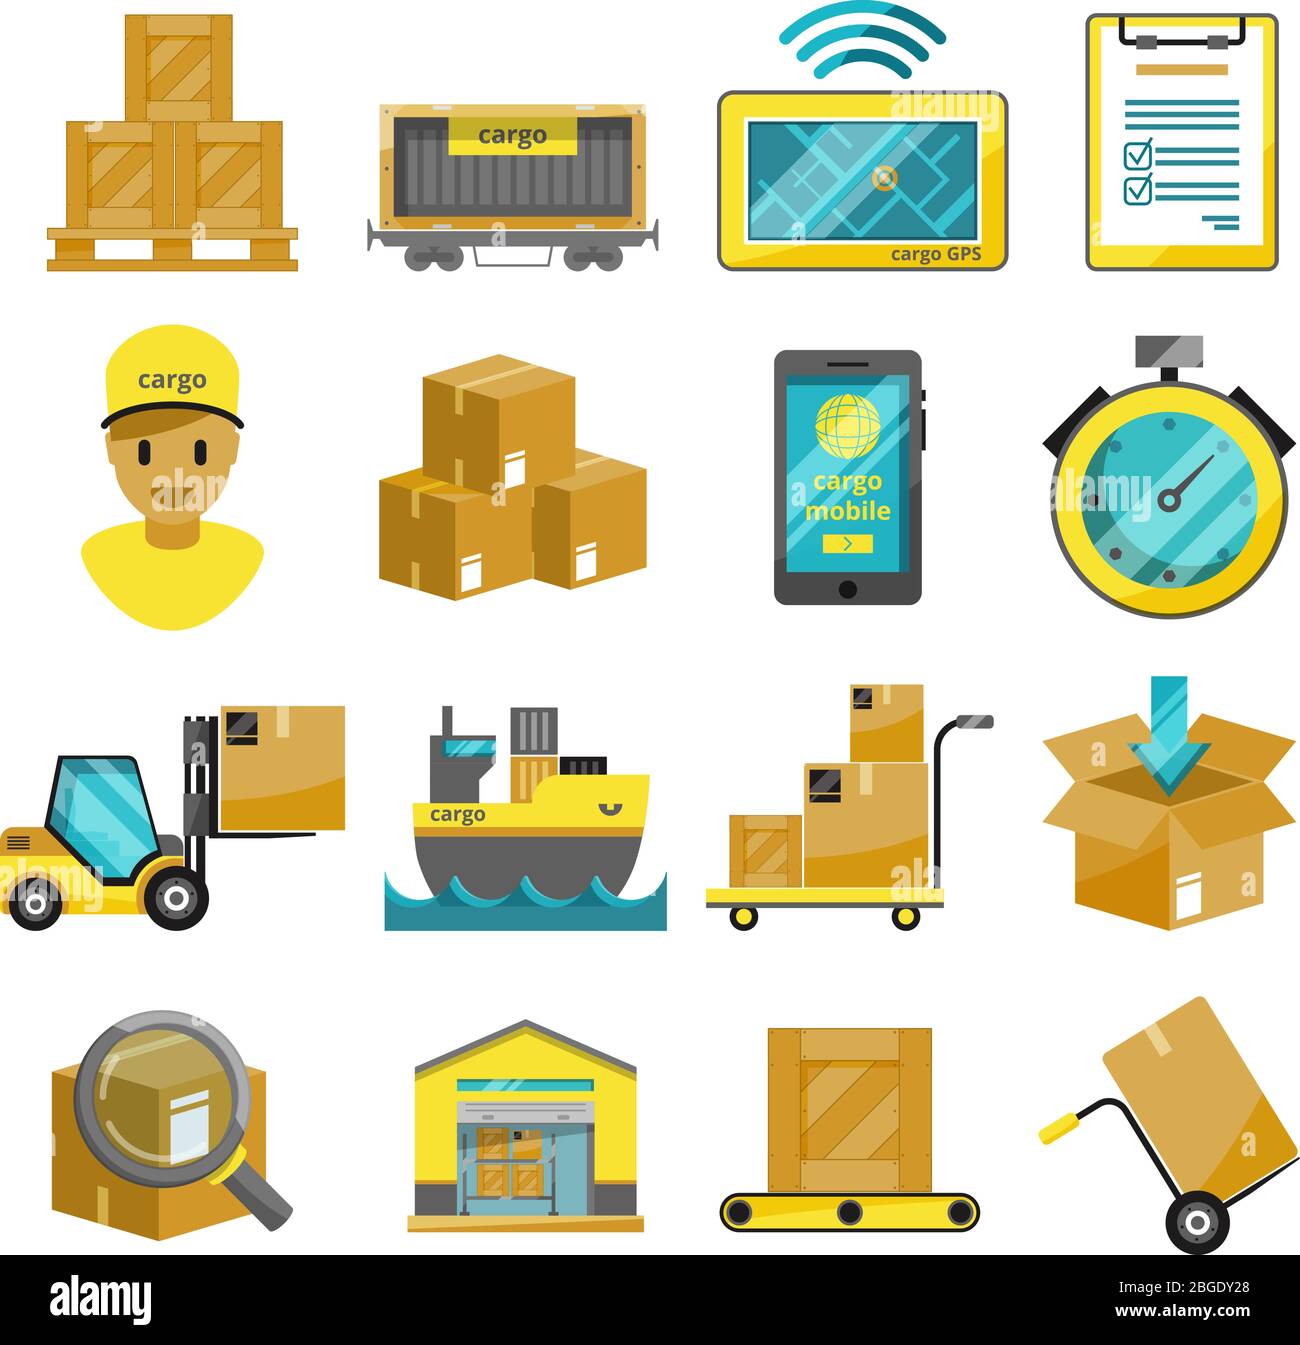 Container boxes, trucks, ships and other cargo icons. Vector illustrations Stock Vector